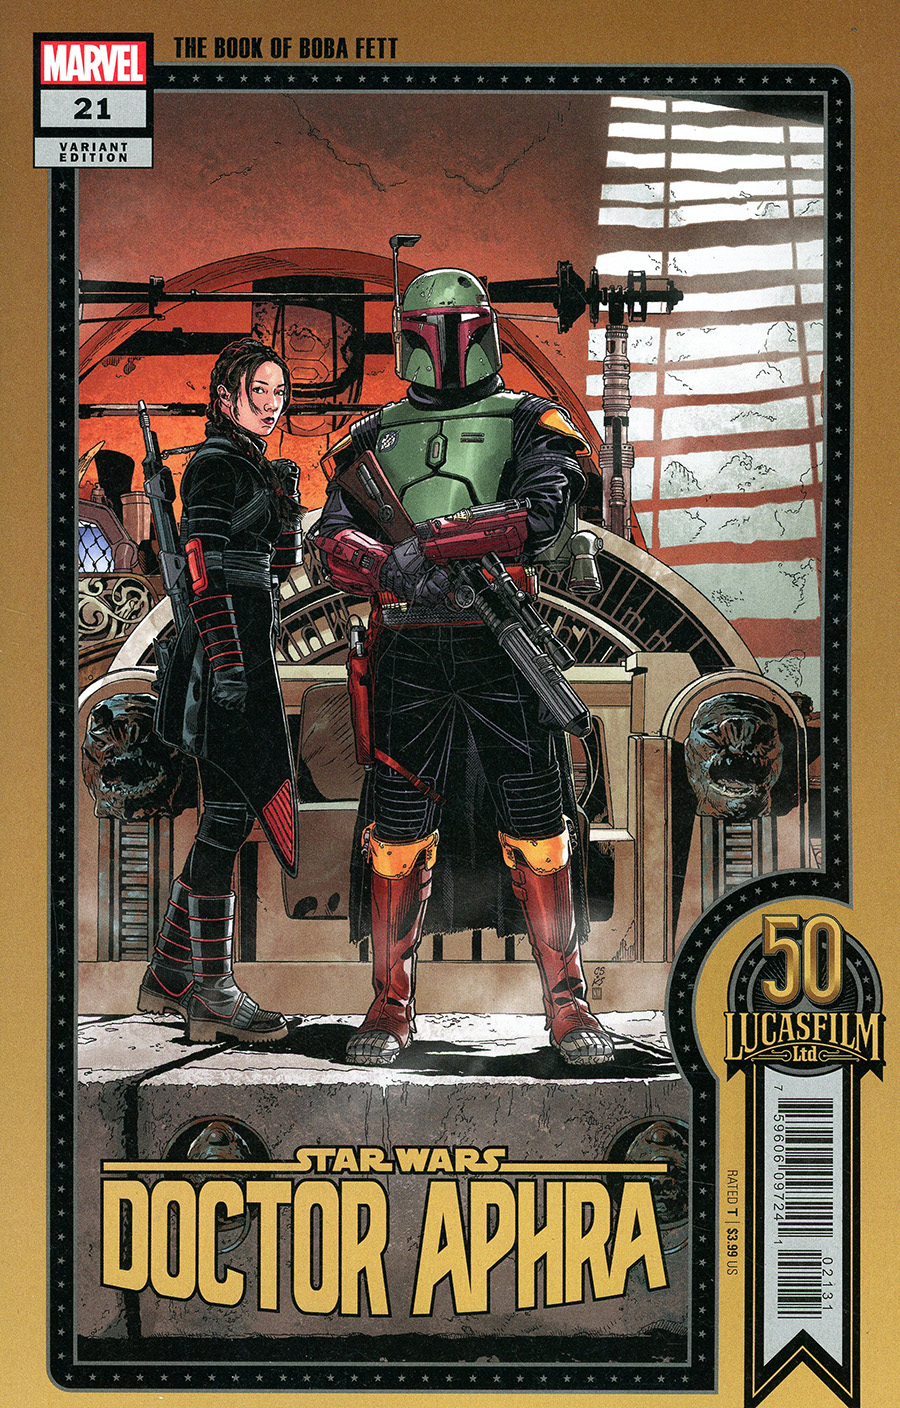 Star Wars Doctor Aphra Vol 2 #21 Cover B Variant Chris Sprouse Lucasfilm 50th Anniversary Cover (Limit 1 Per Customer)